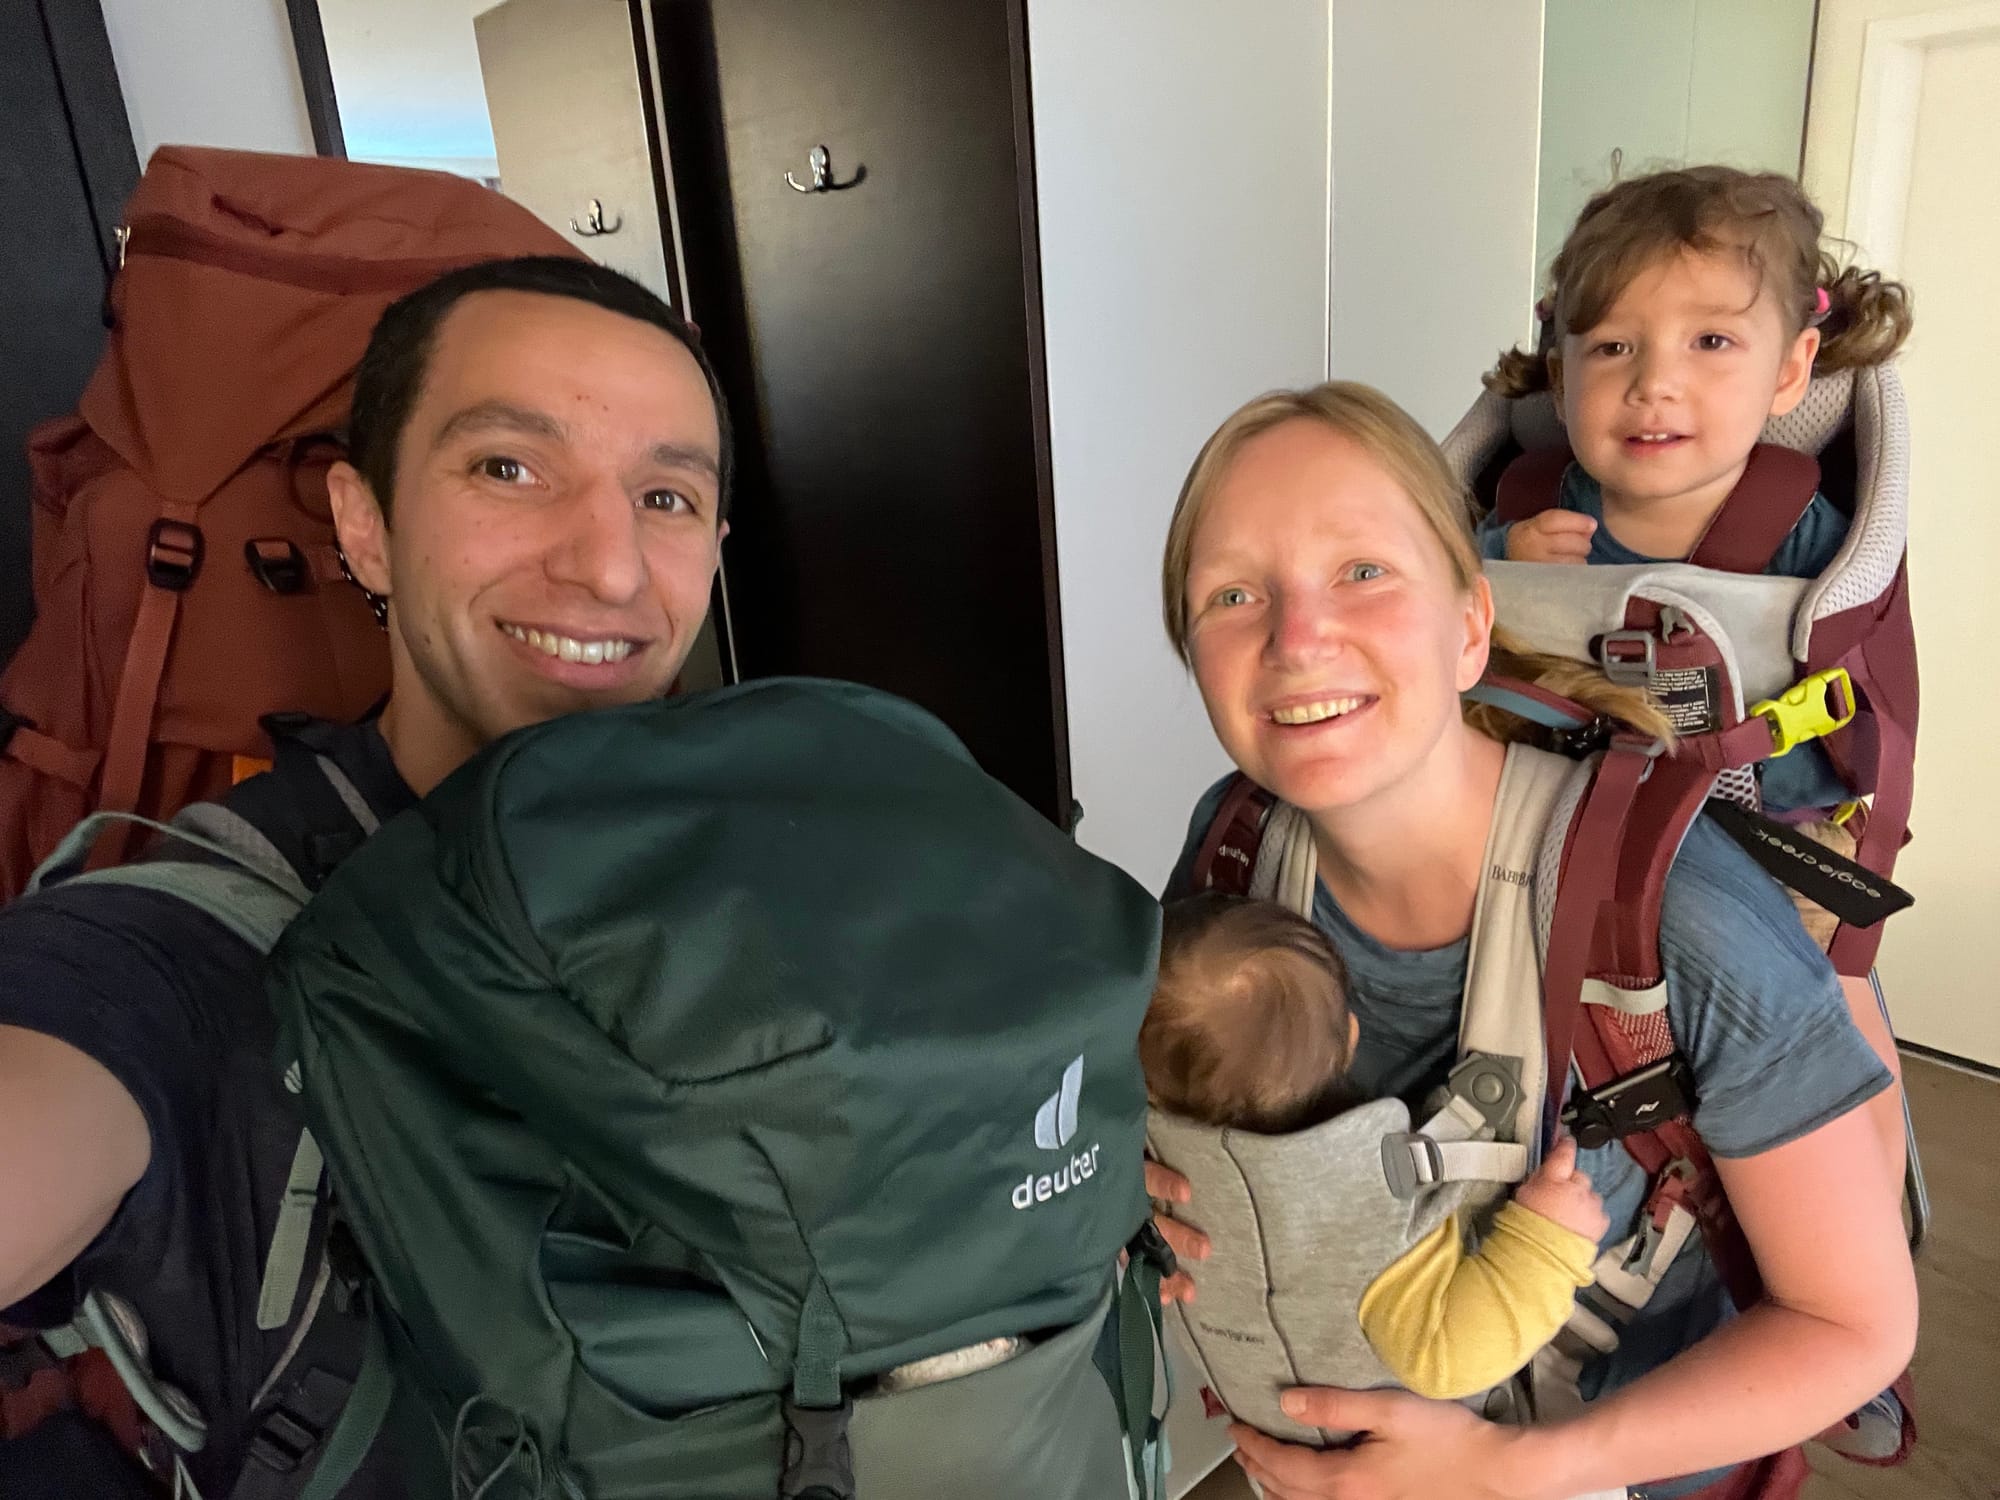 Backpacking with kids: packing tips